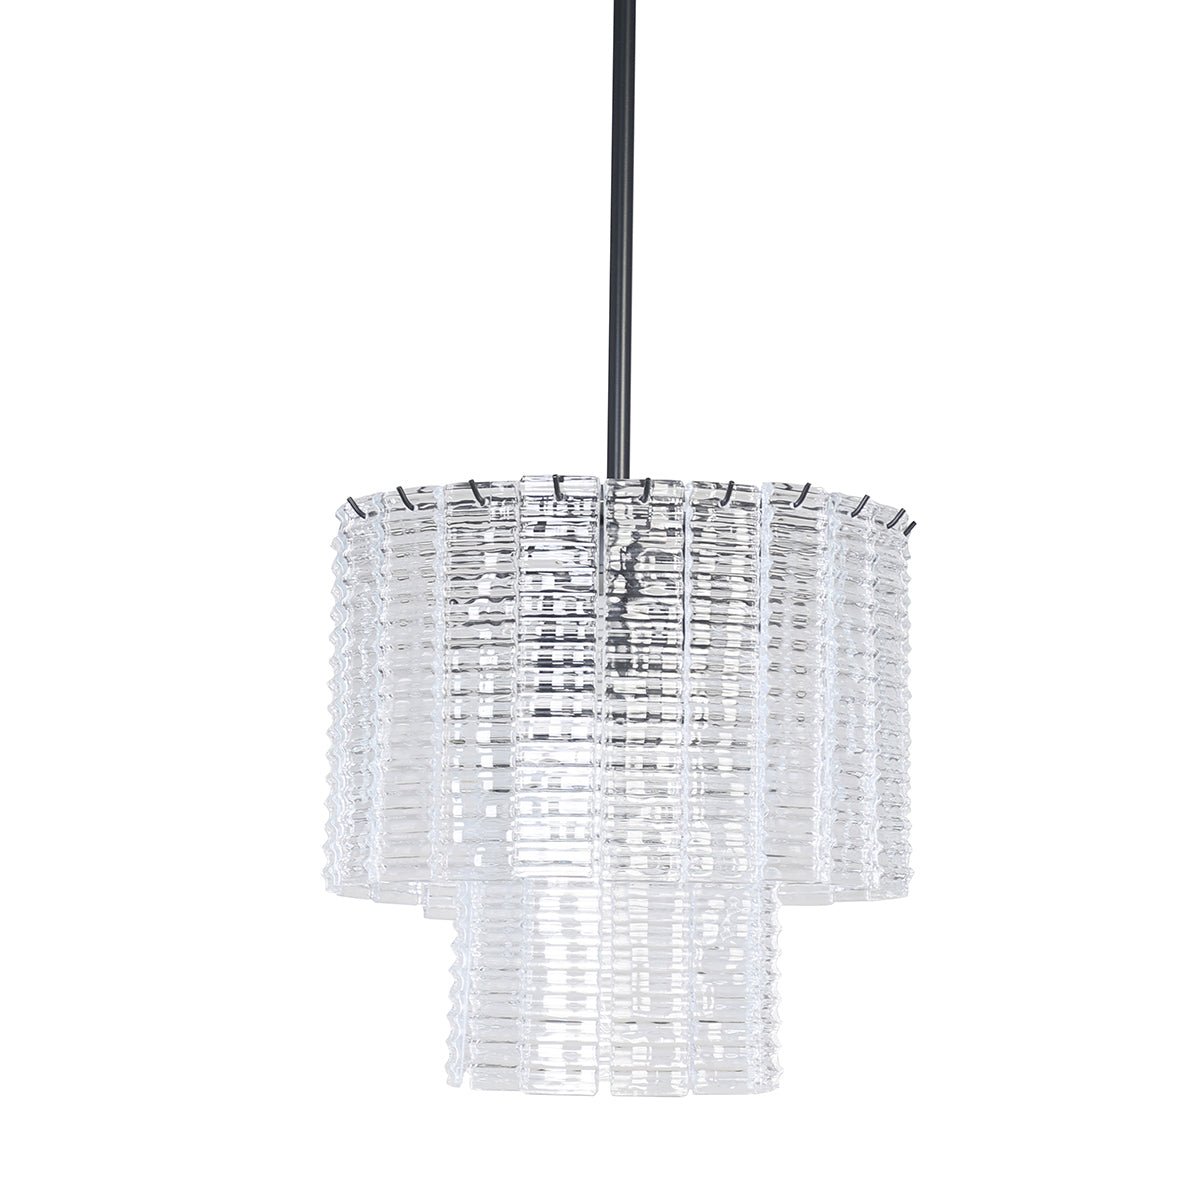 Cuirass Round Ribbed Glass Tile Chandelier Collection - Italian Concept - 